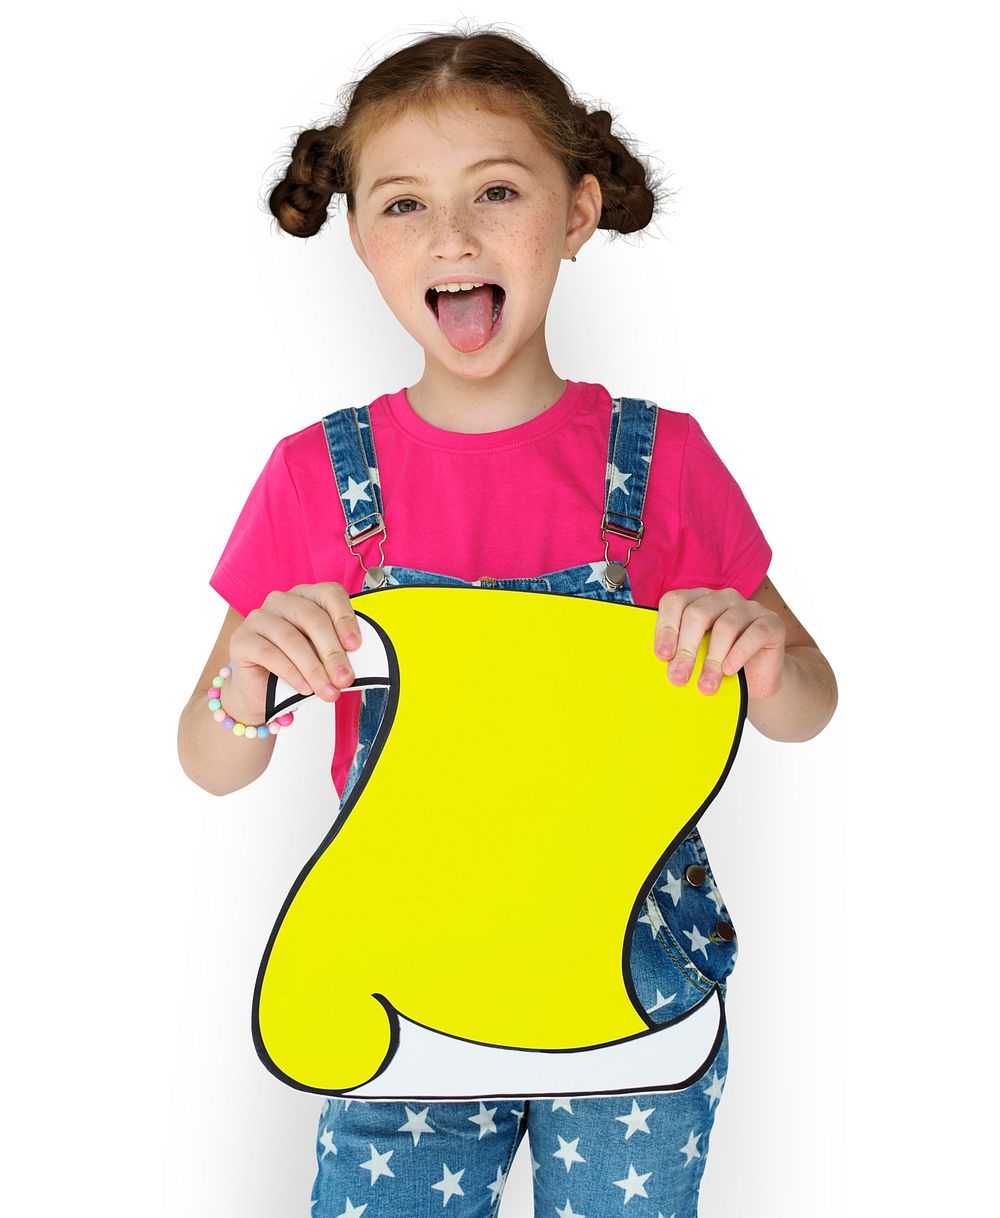 Little Girl Smiling Happiness Holding Banner Copy Space